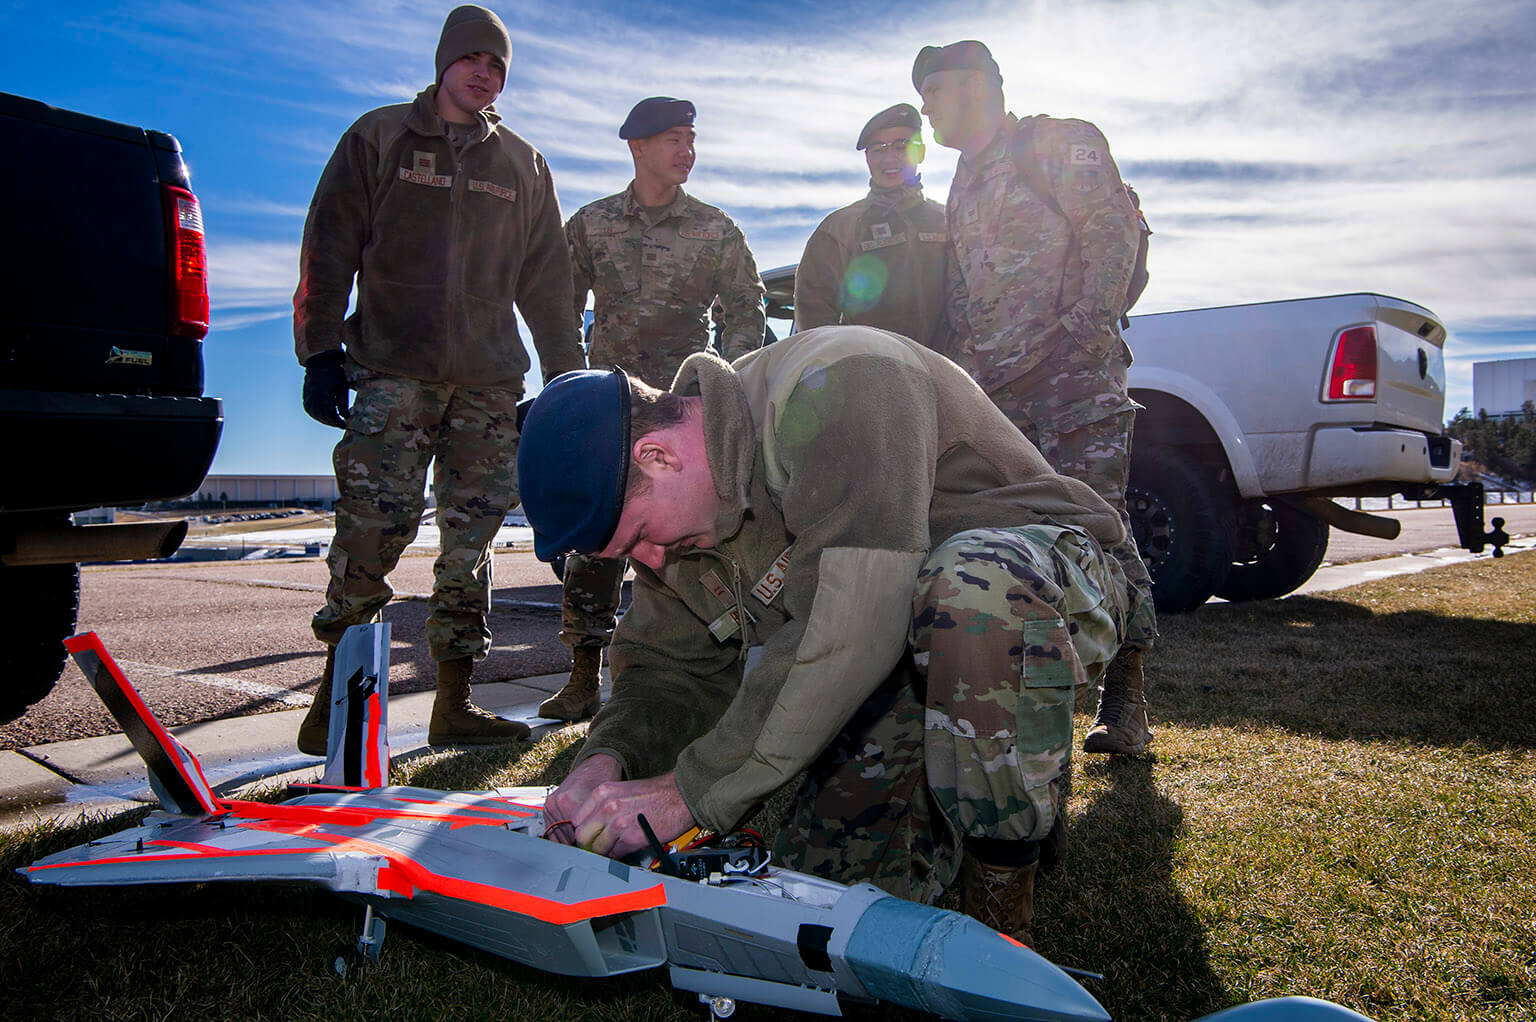 Cadet 1st Class Nolan Brody makes modifications on his team’s target drone